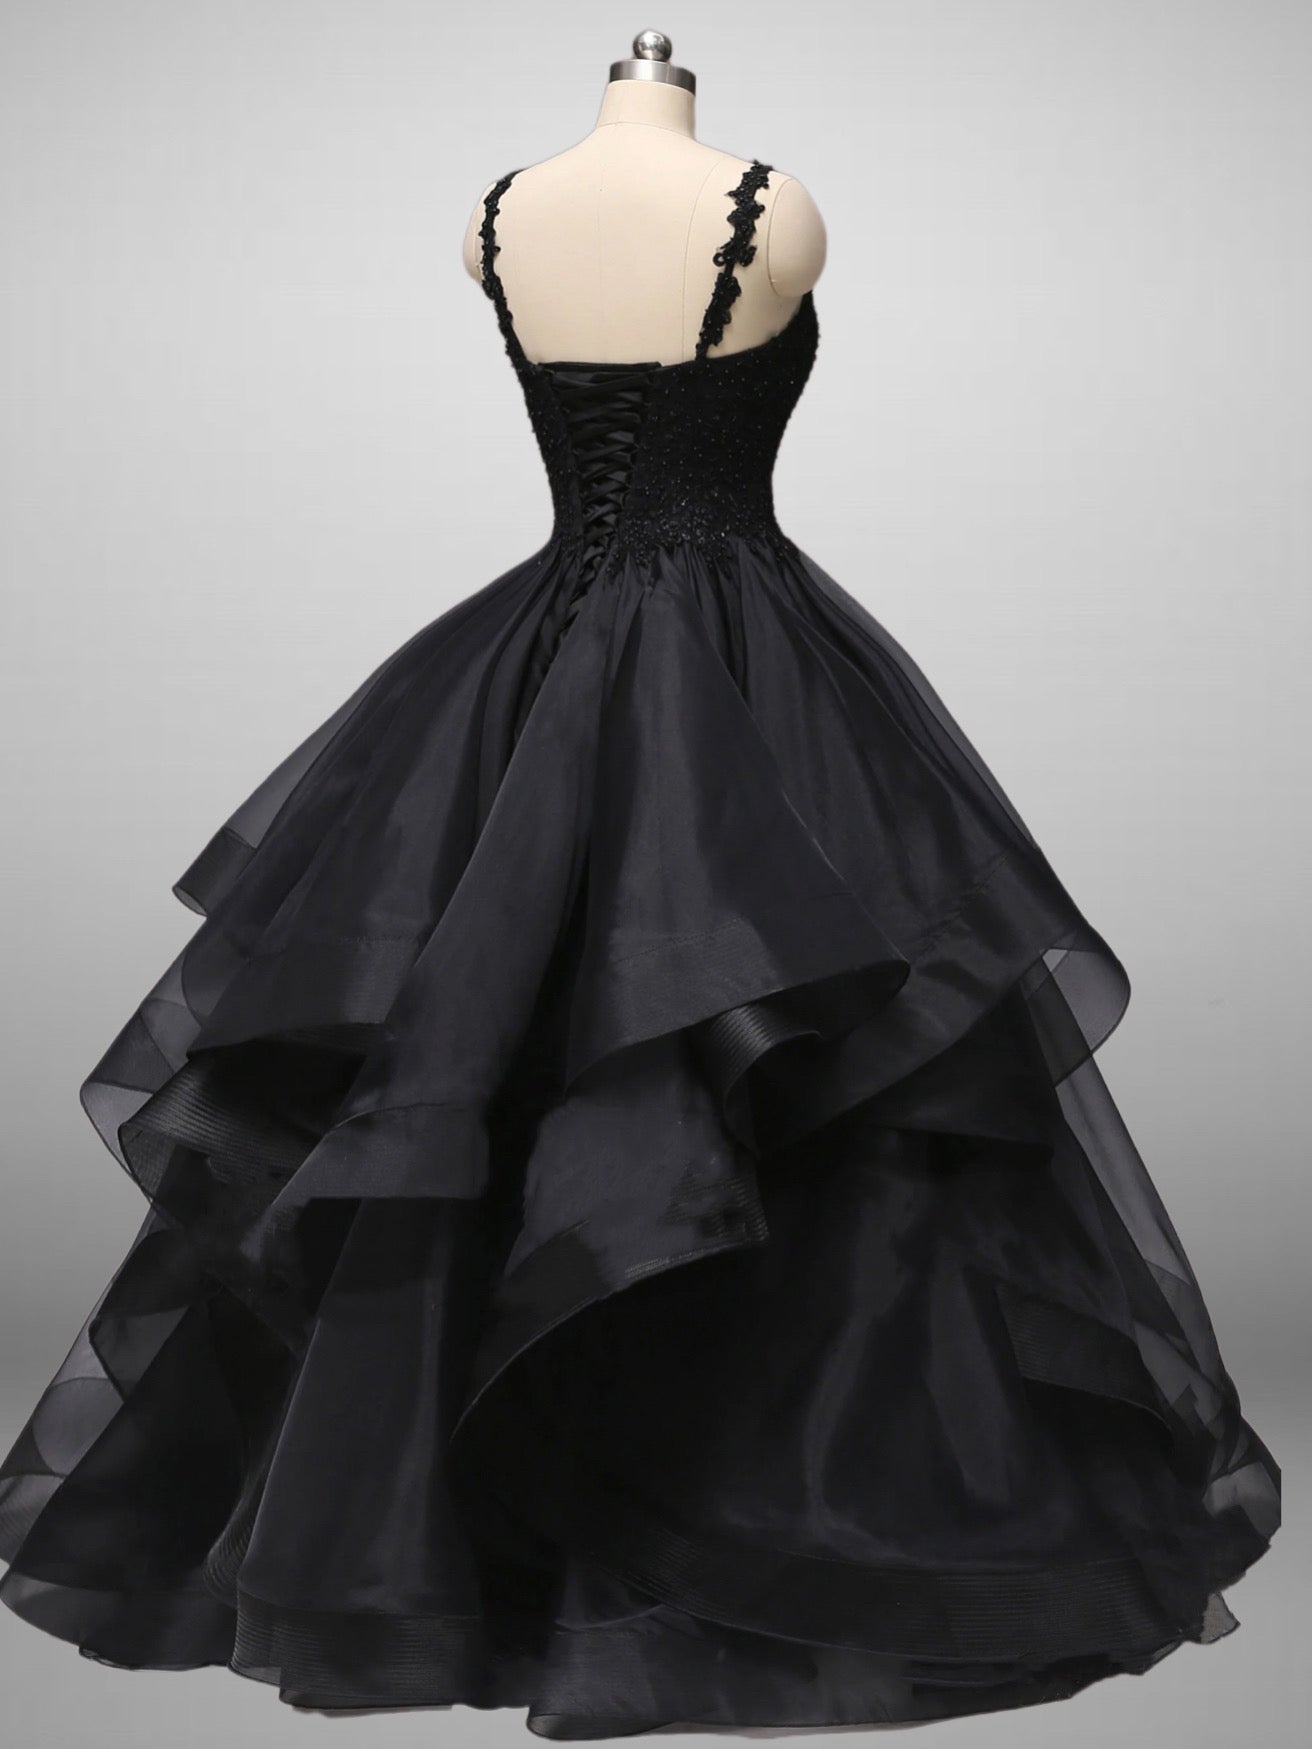 Classic Gothic Black Lace Embroidered A-Line Formal Dress With Ruffle Skirt Spaghetti Straps Plus Size